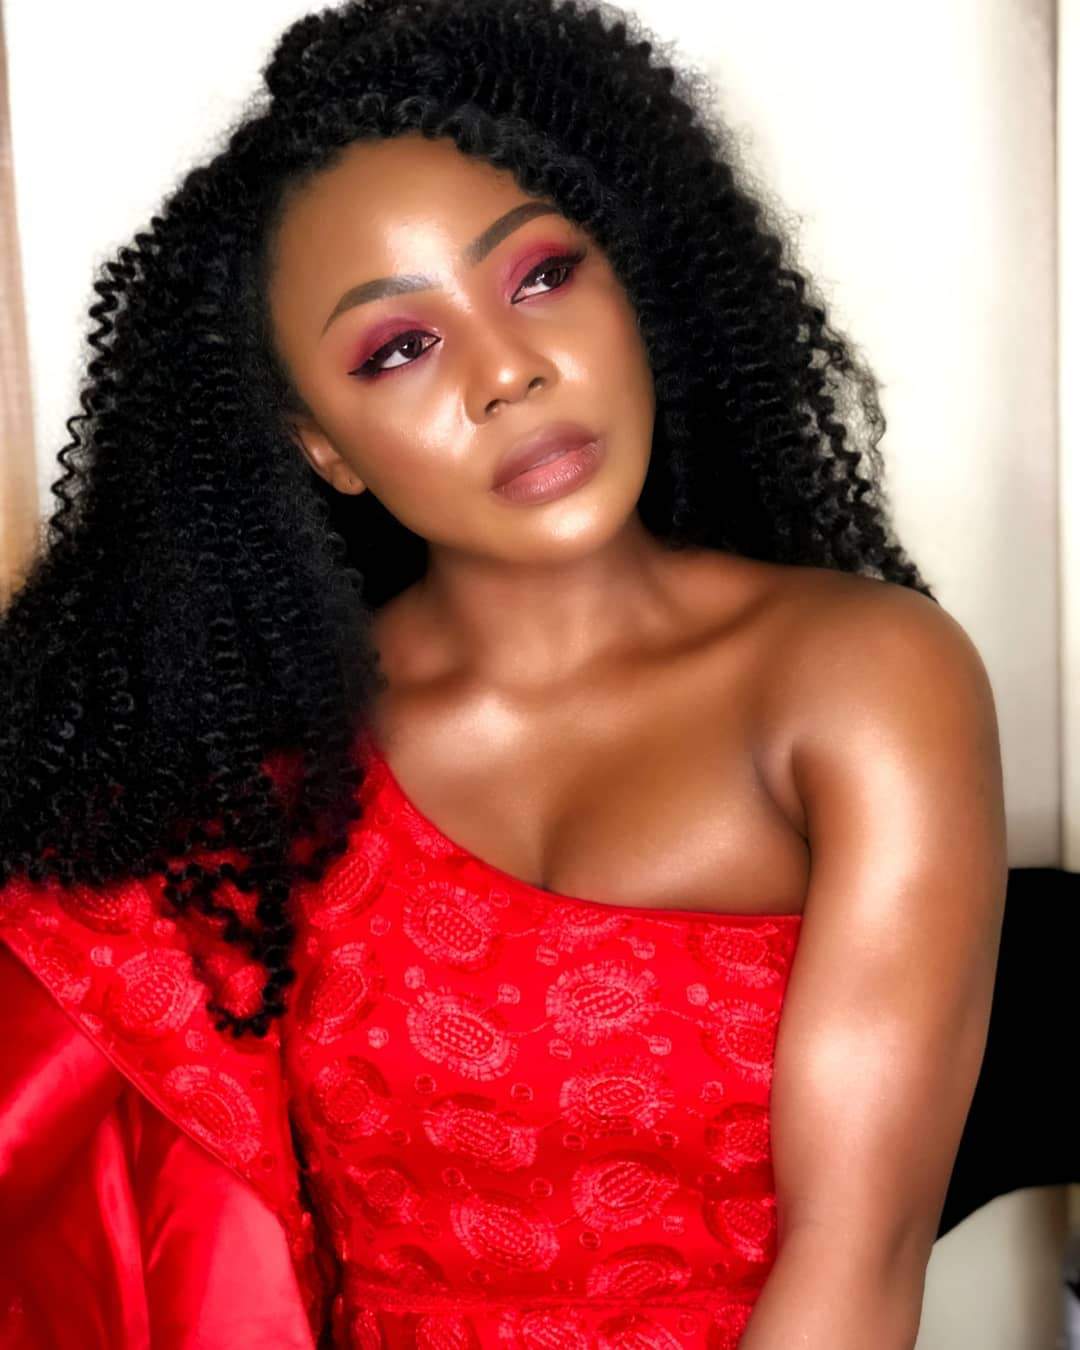 BBNaija's Ifu Ennada Wows In Massive Cleavage-Baring Chic Outfit